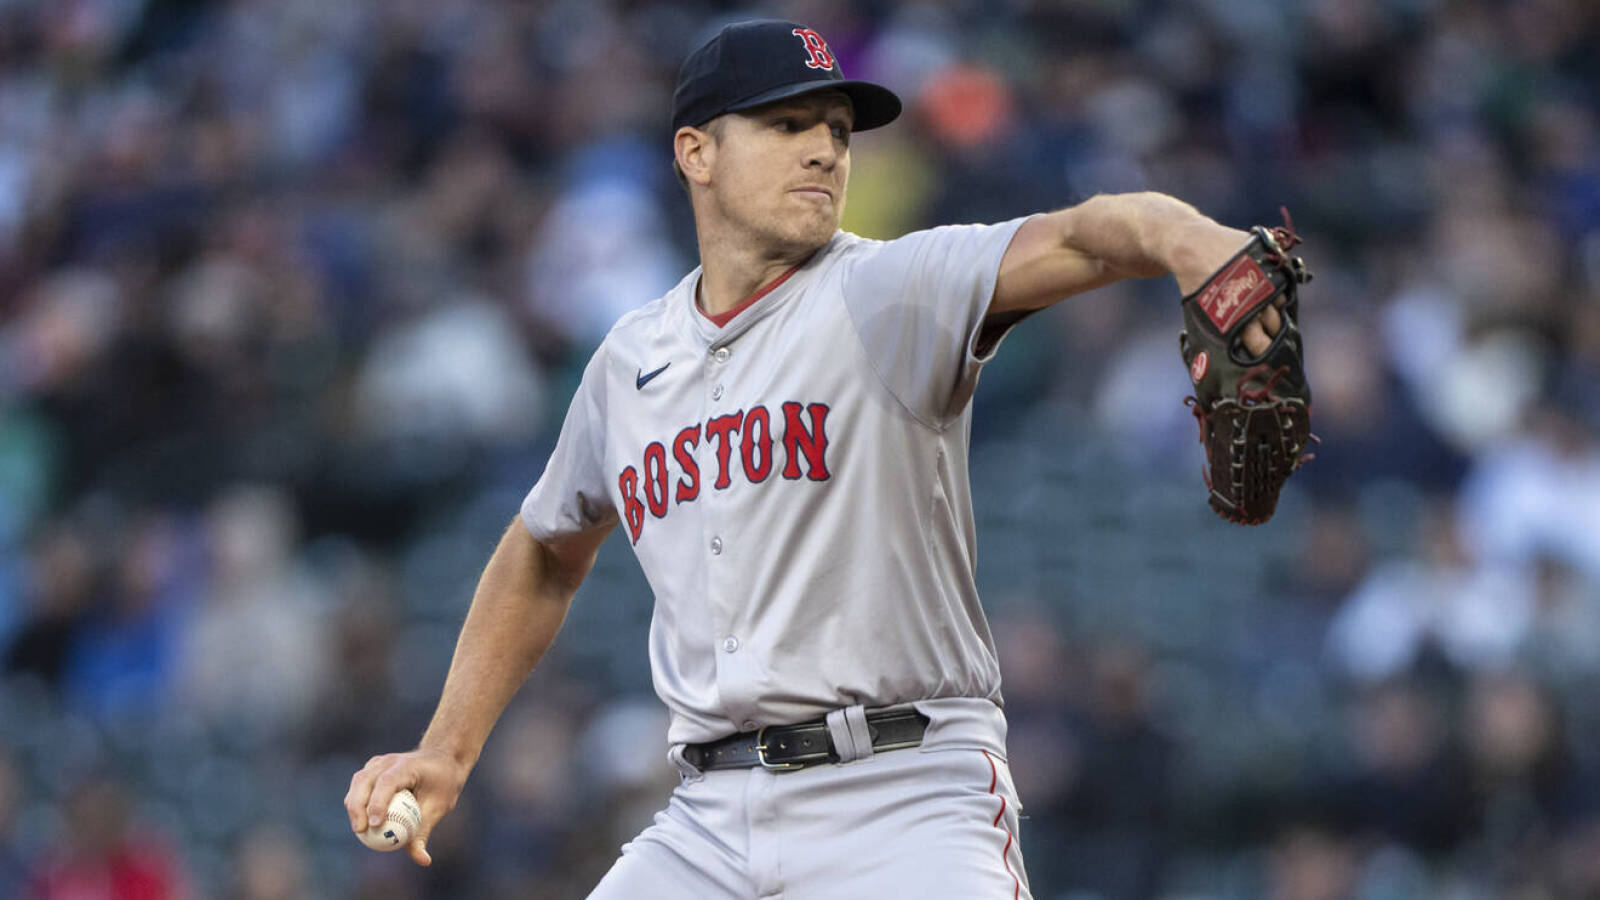 Red Sox place starting pitcher Nick Pivetta on IL with right flexor strain